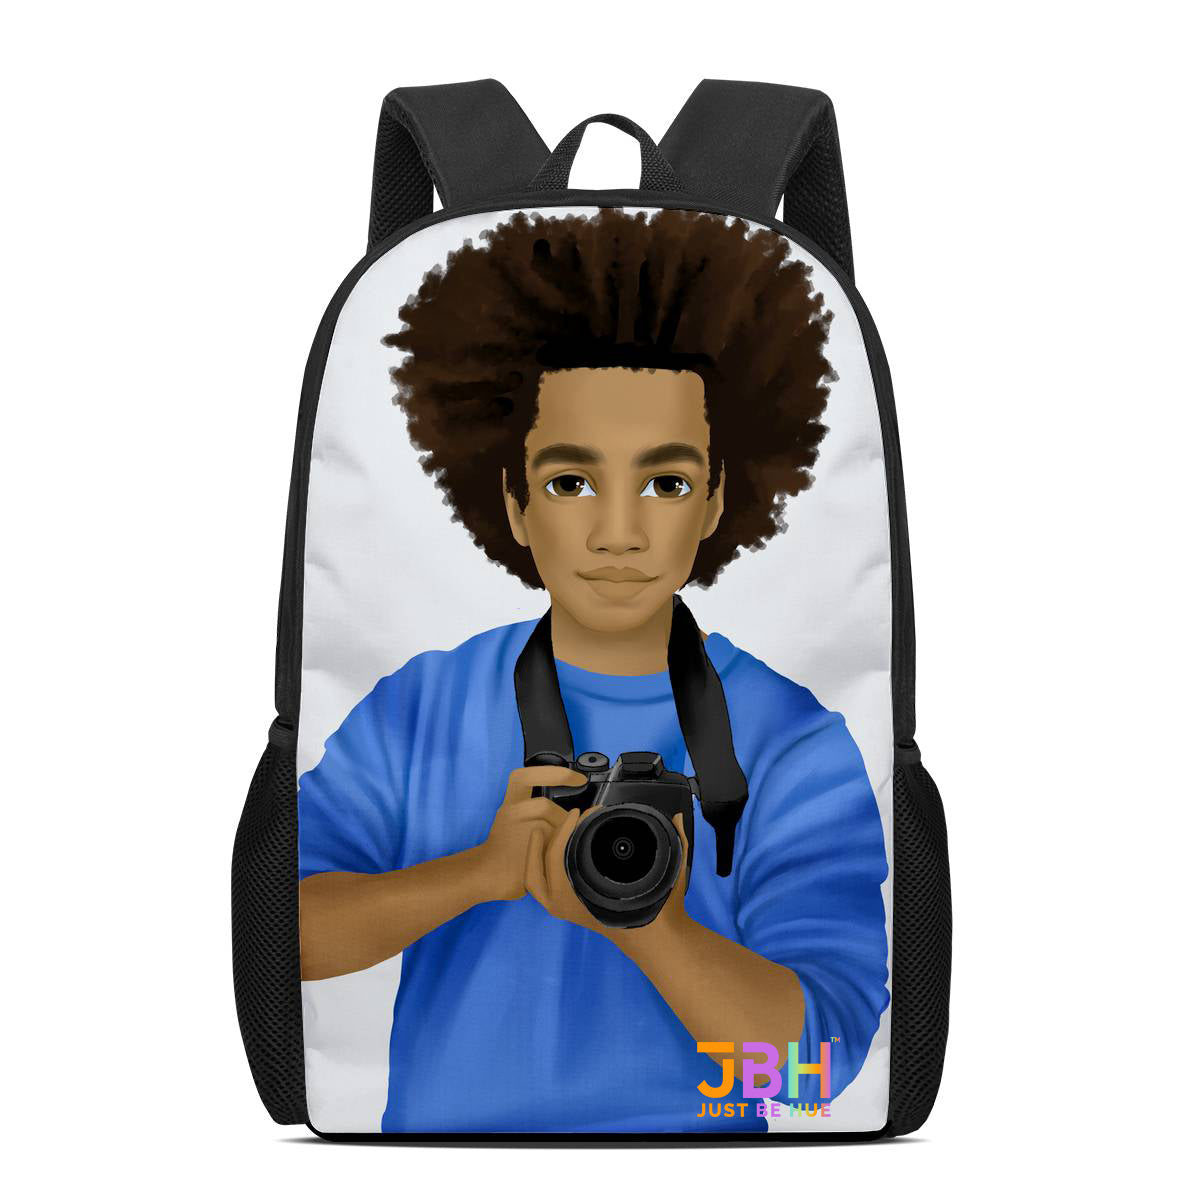 Phillip The Photographer Backpack